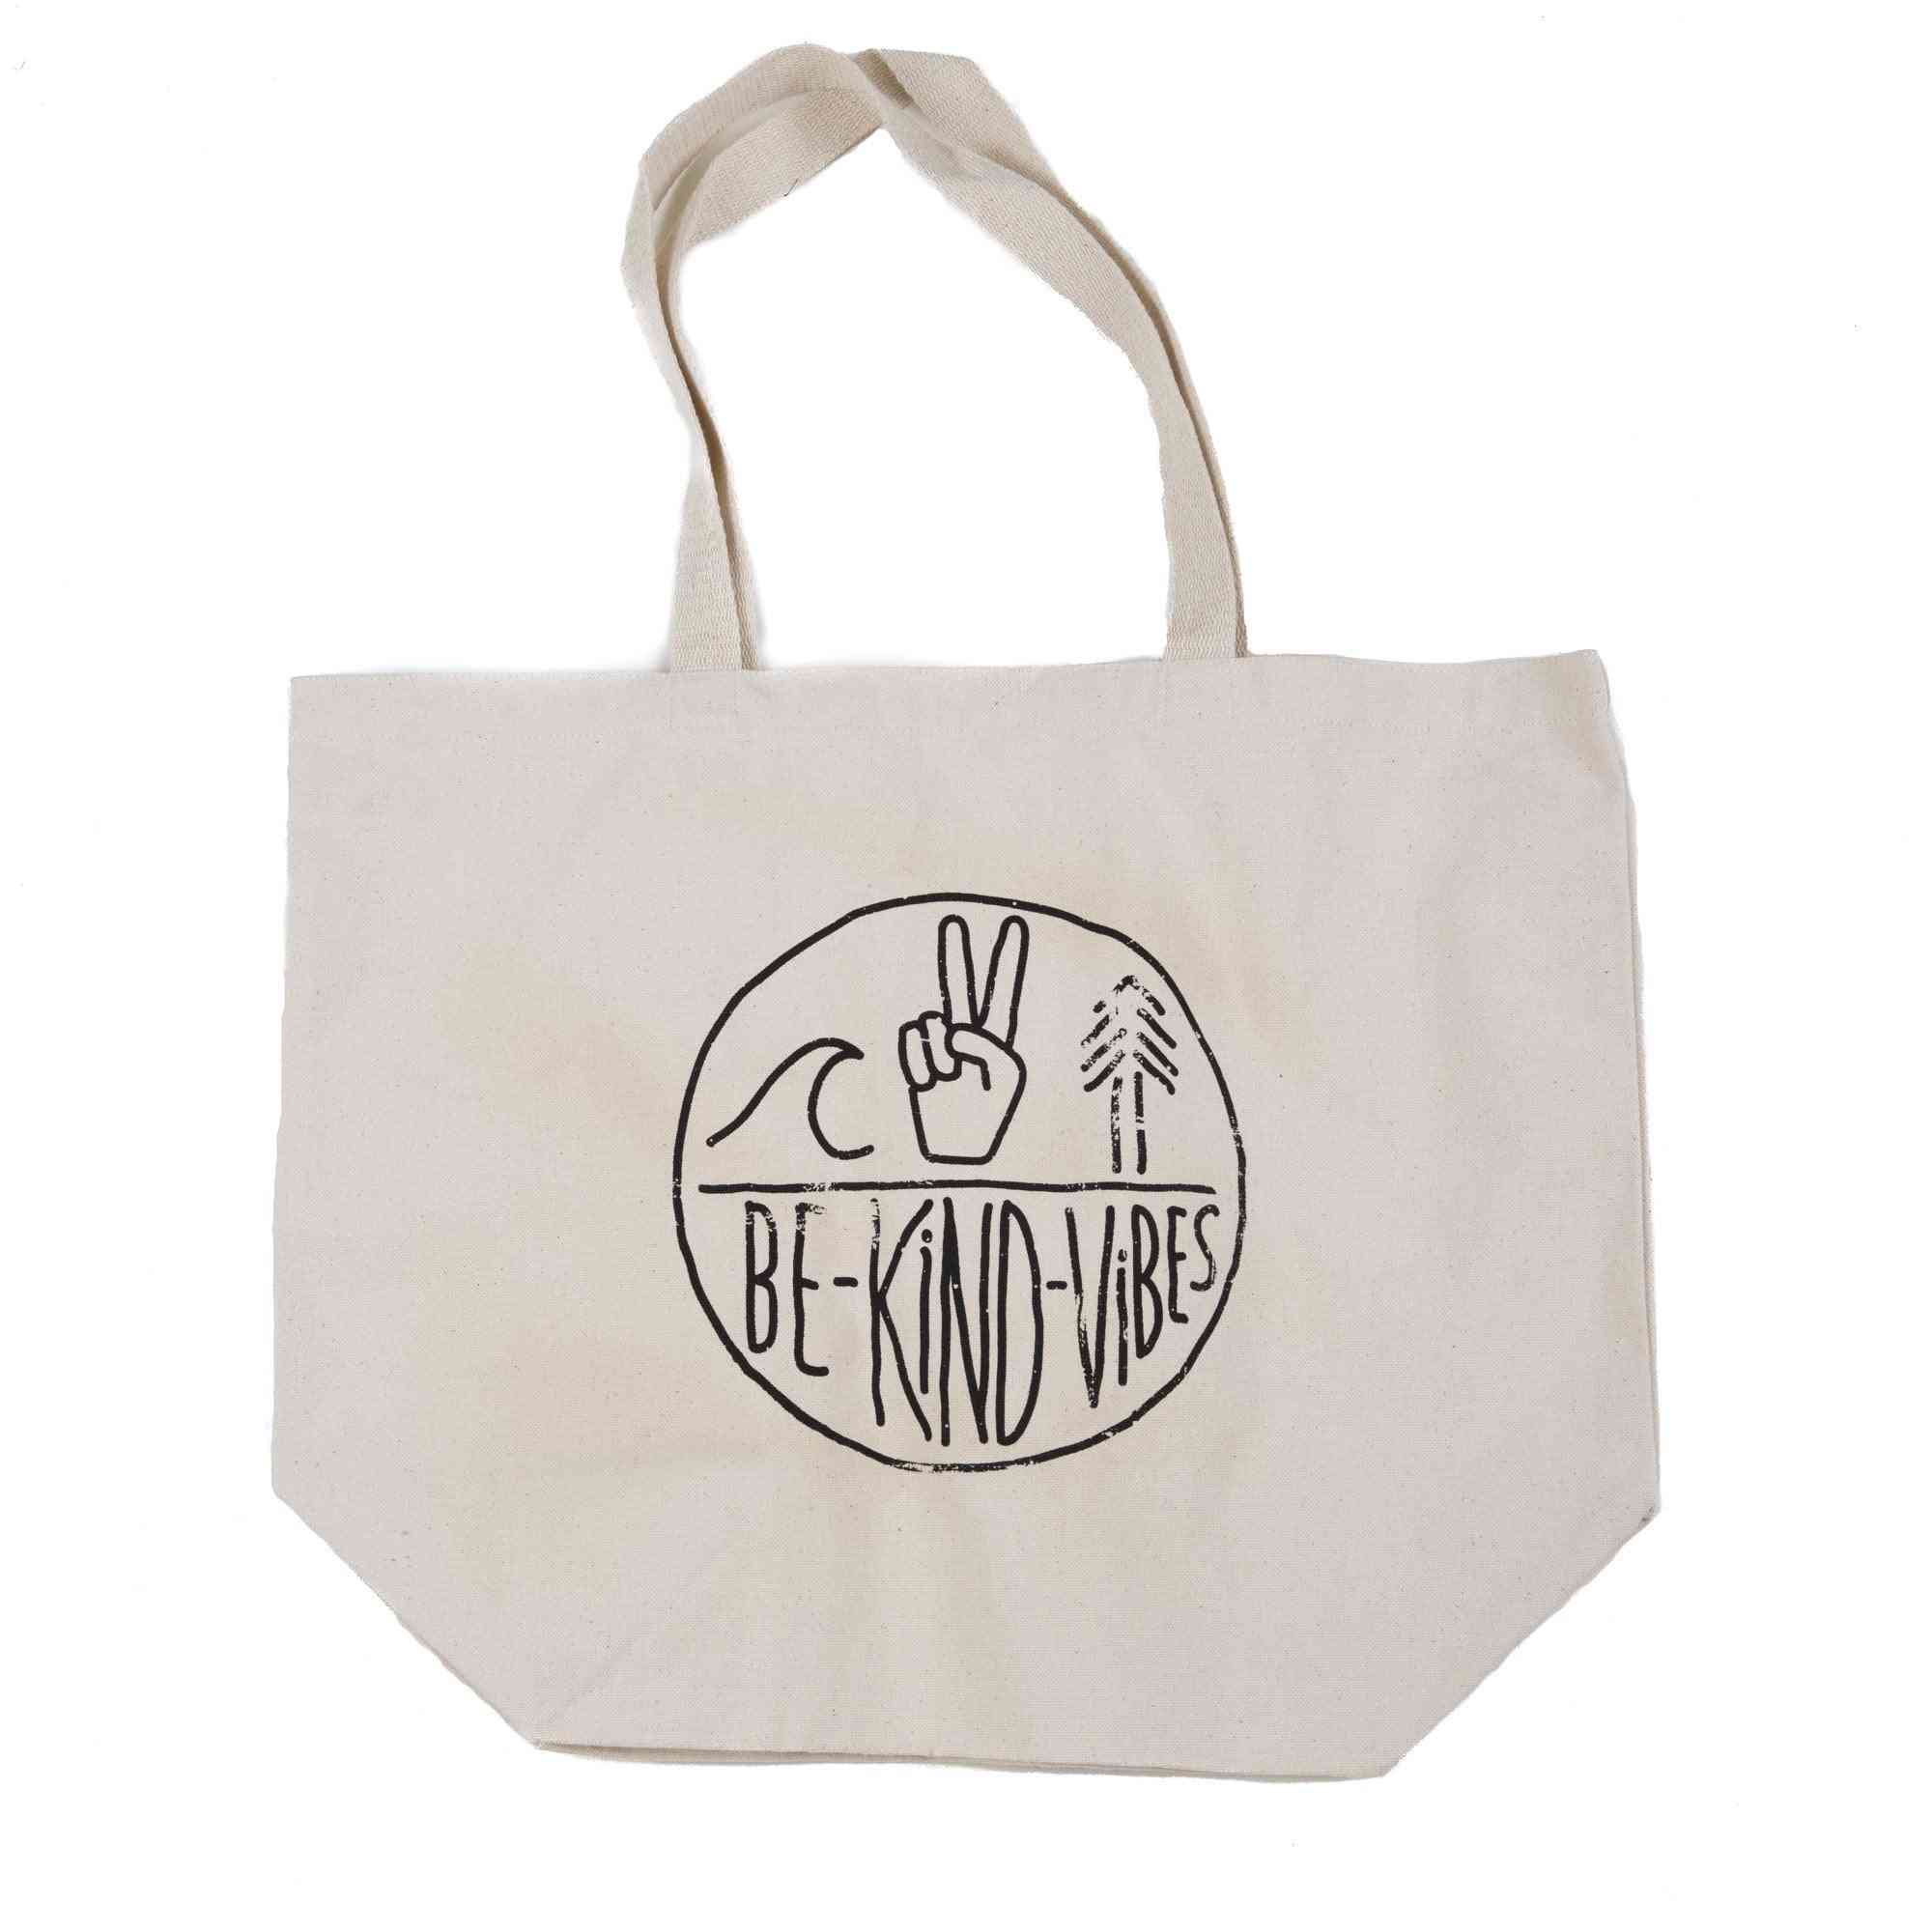 Vibes tote